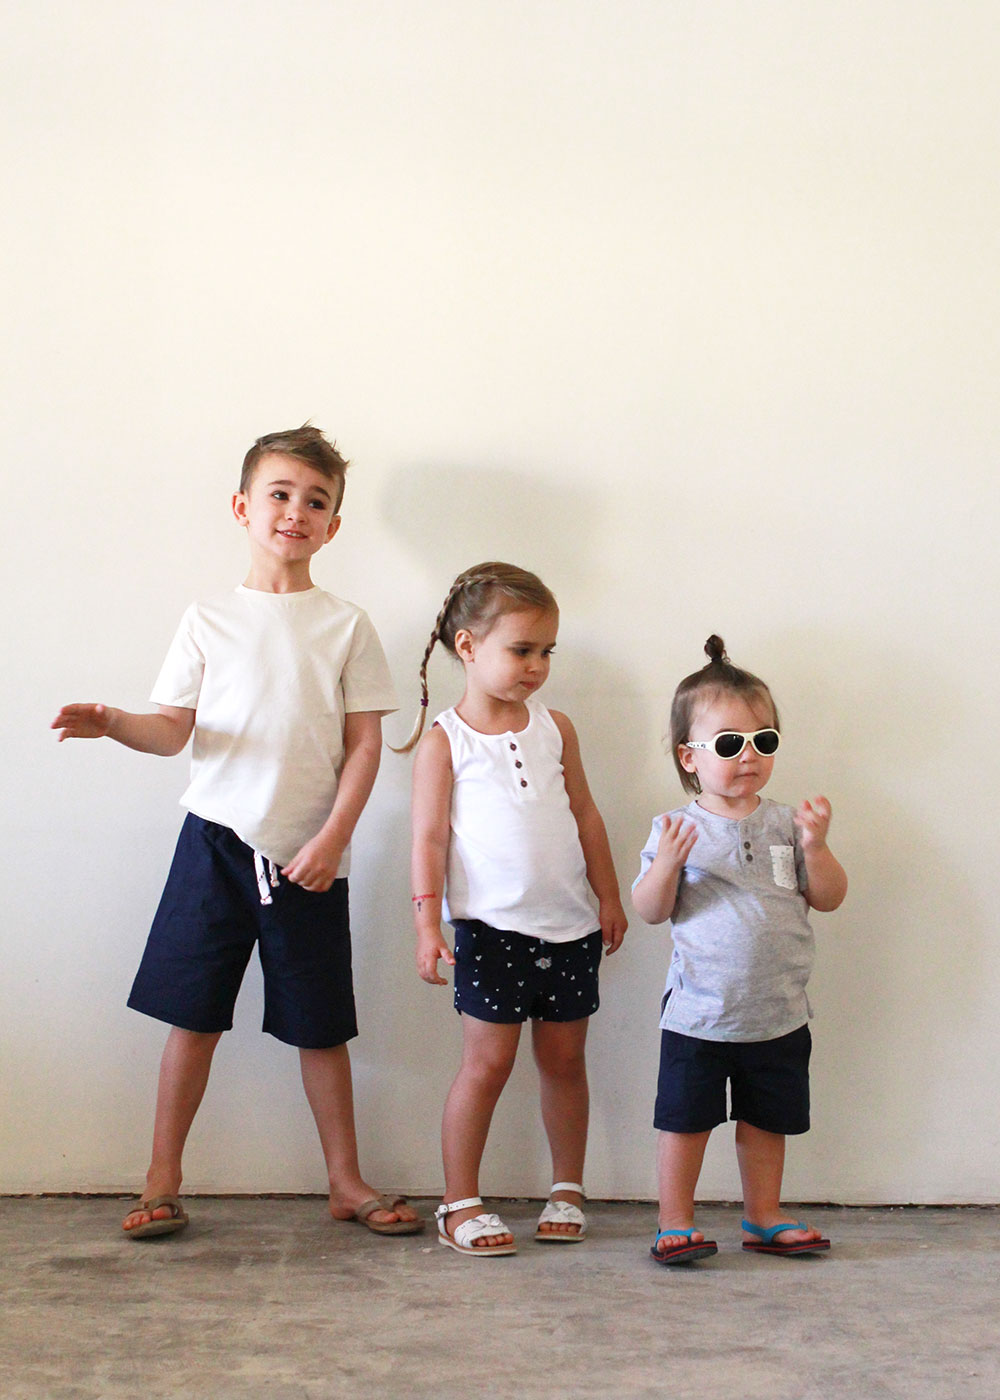 getting ready for our new home remodel! the kids all wearing colored organics clothing | thelovedesginedlife.com